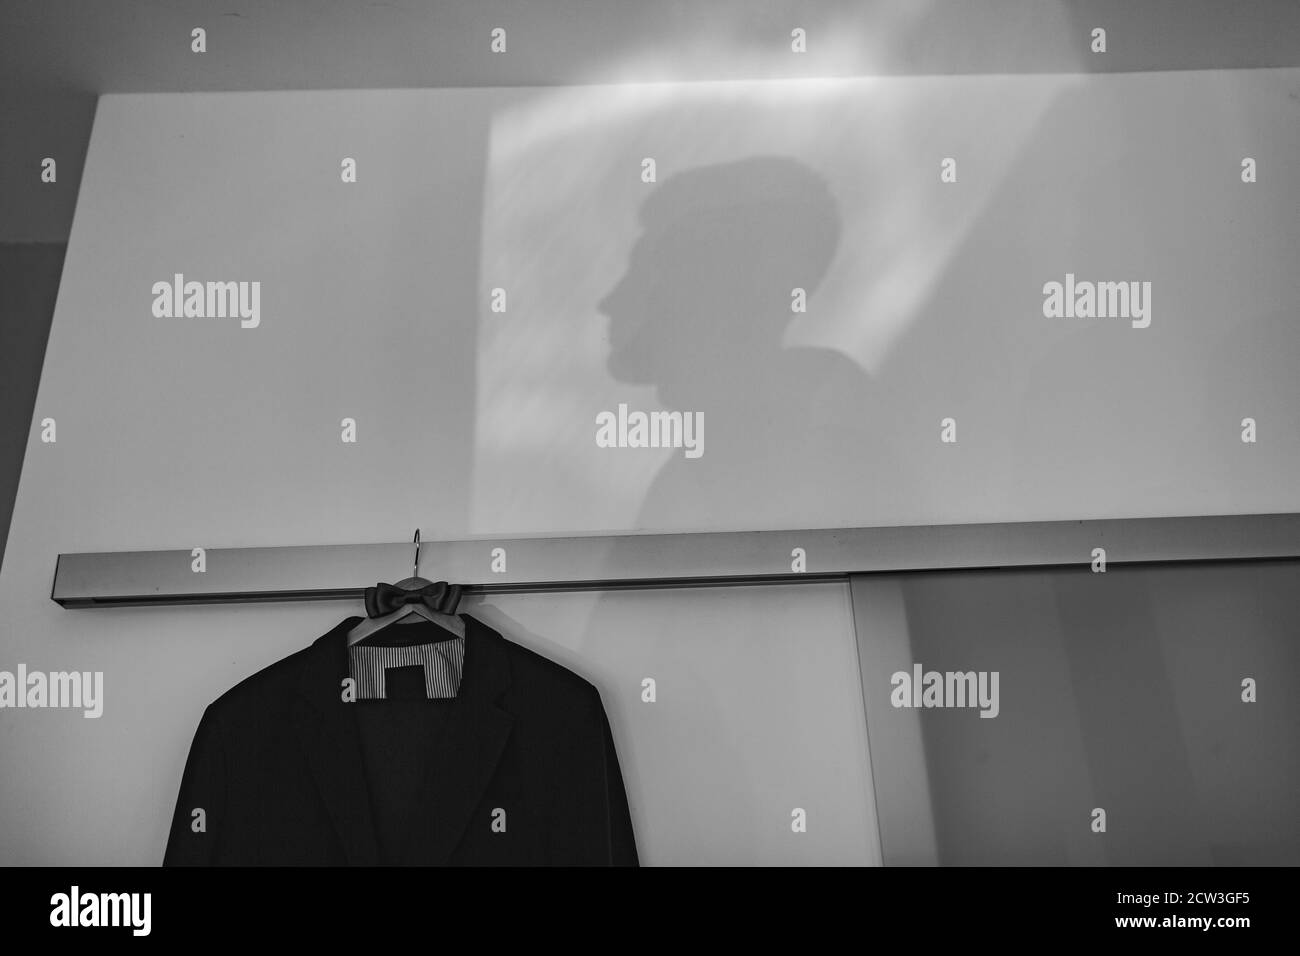 A man's jacket hangs on a hanger with a bow tie against the background of the shadow of a man, black and white photo. Stock Photo